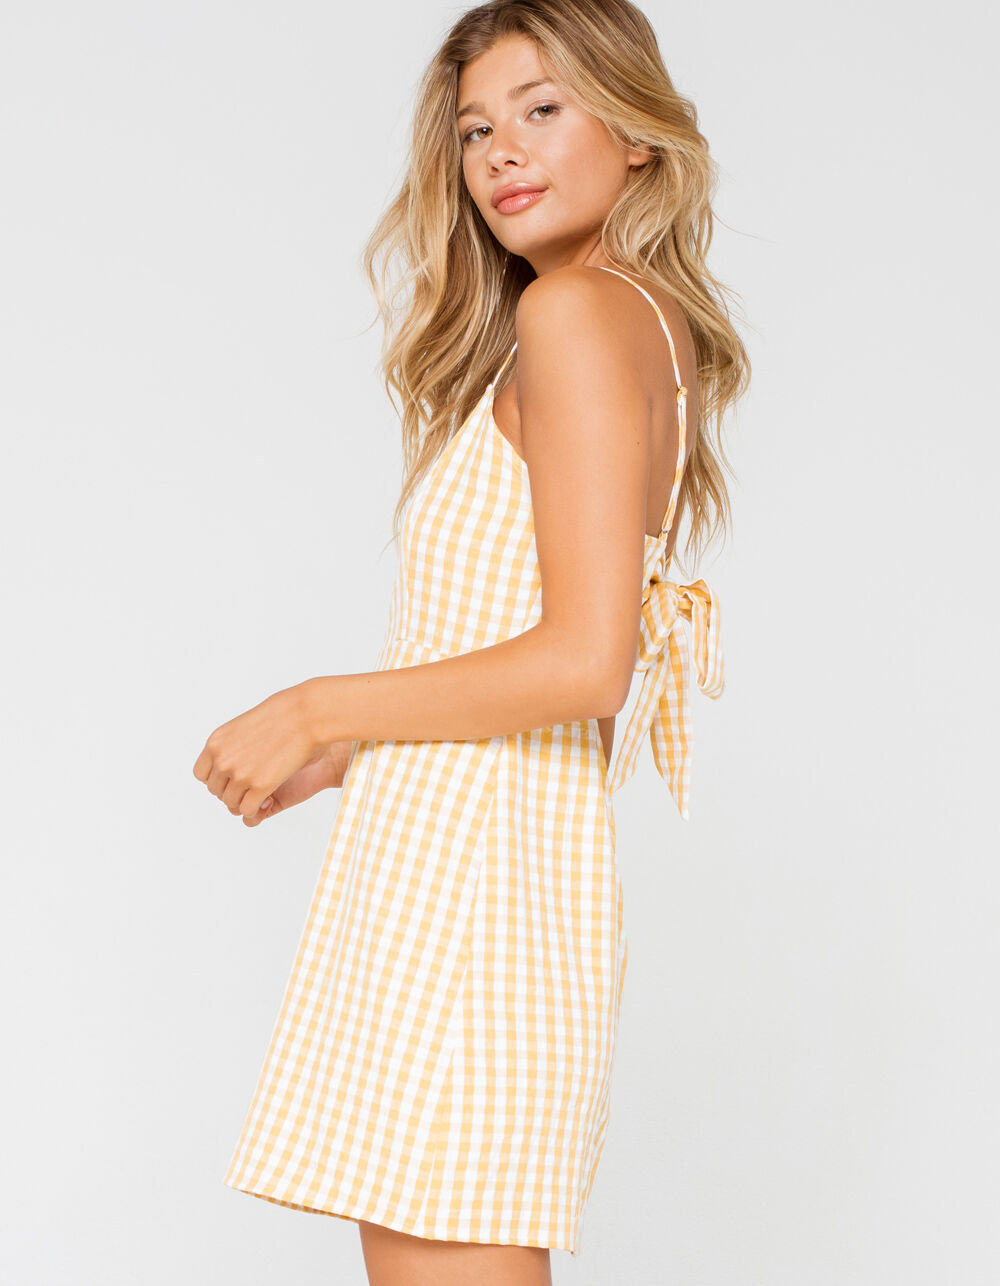 IVY & MAIN Gingham Tie Back Yellow Dress - YELLOW | Tillys